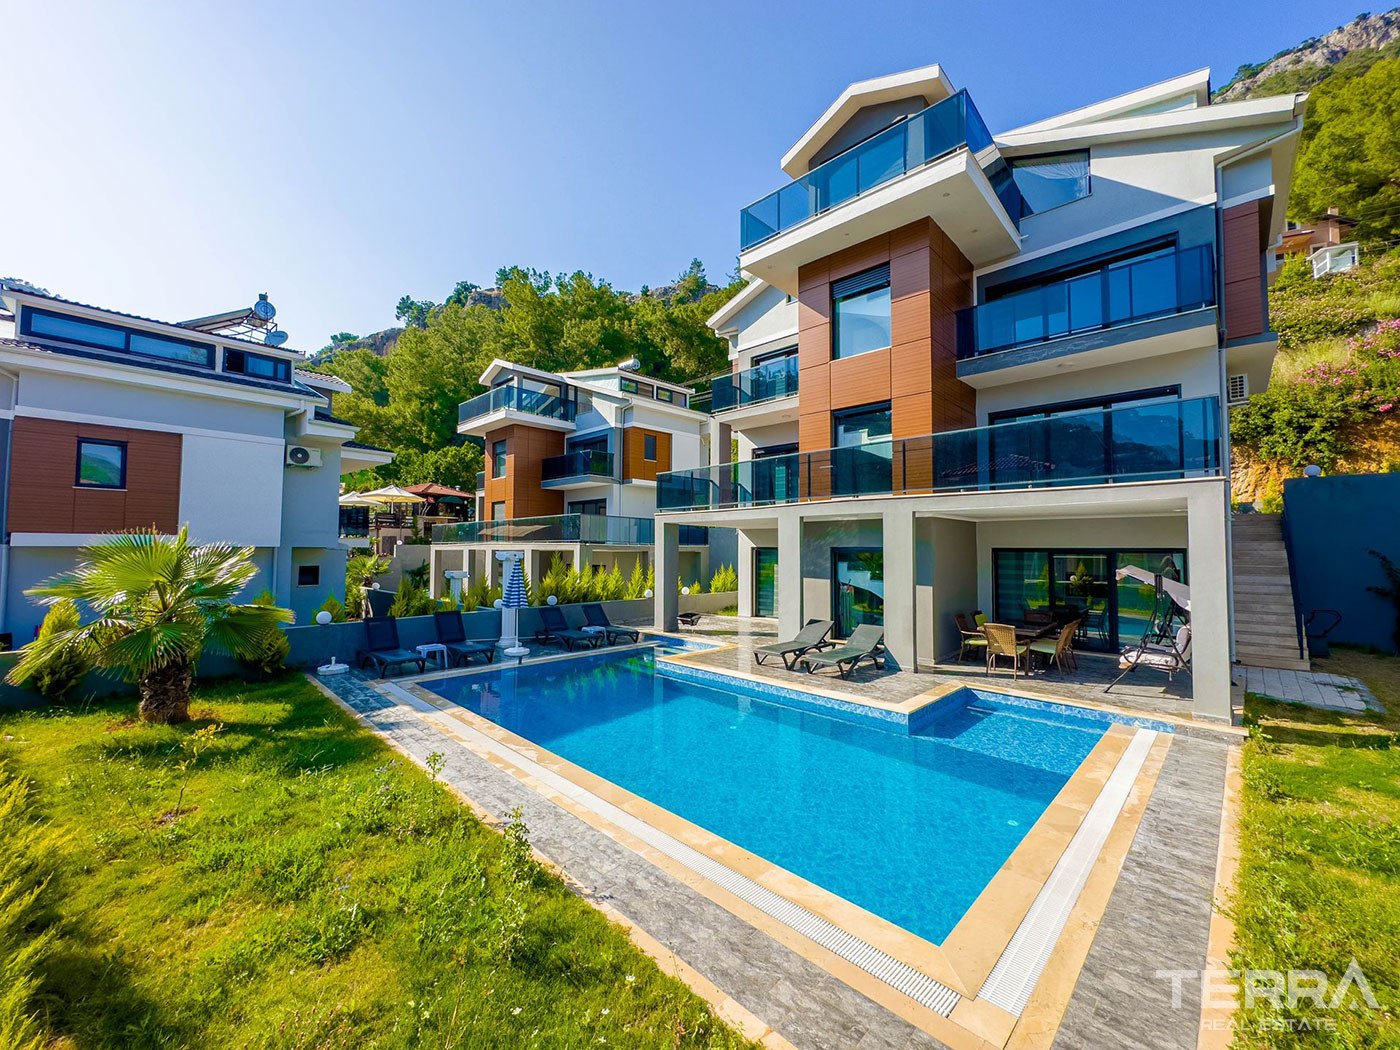 Serene Location from the Fethiye Villa with Spacious Living Spaces